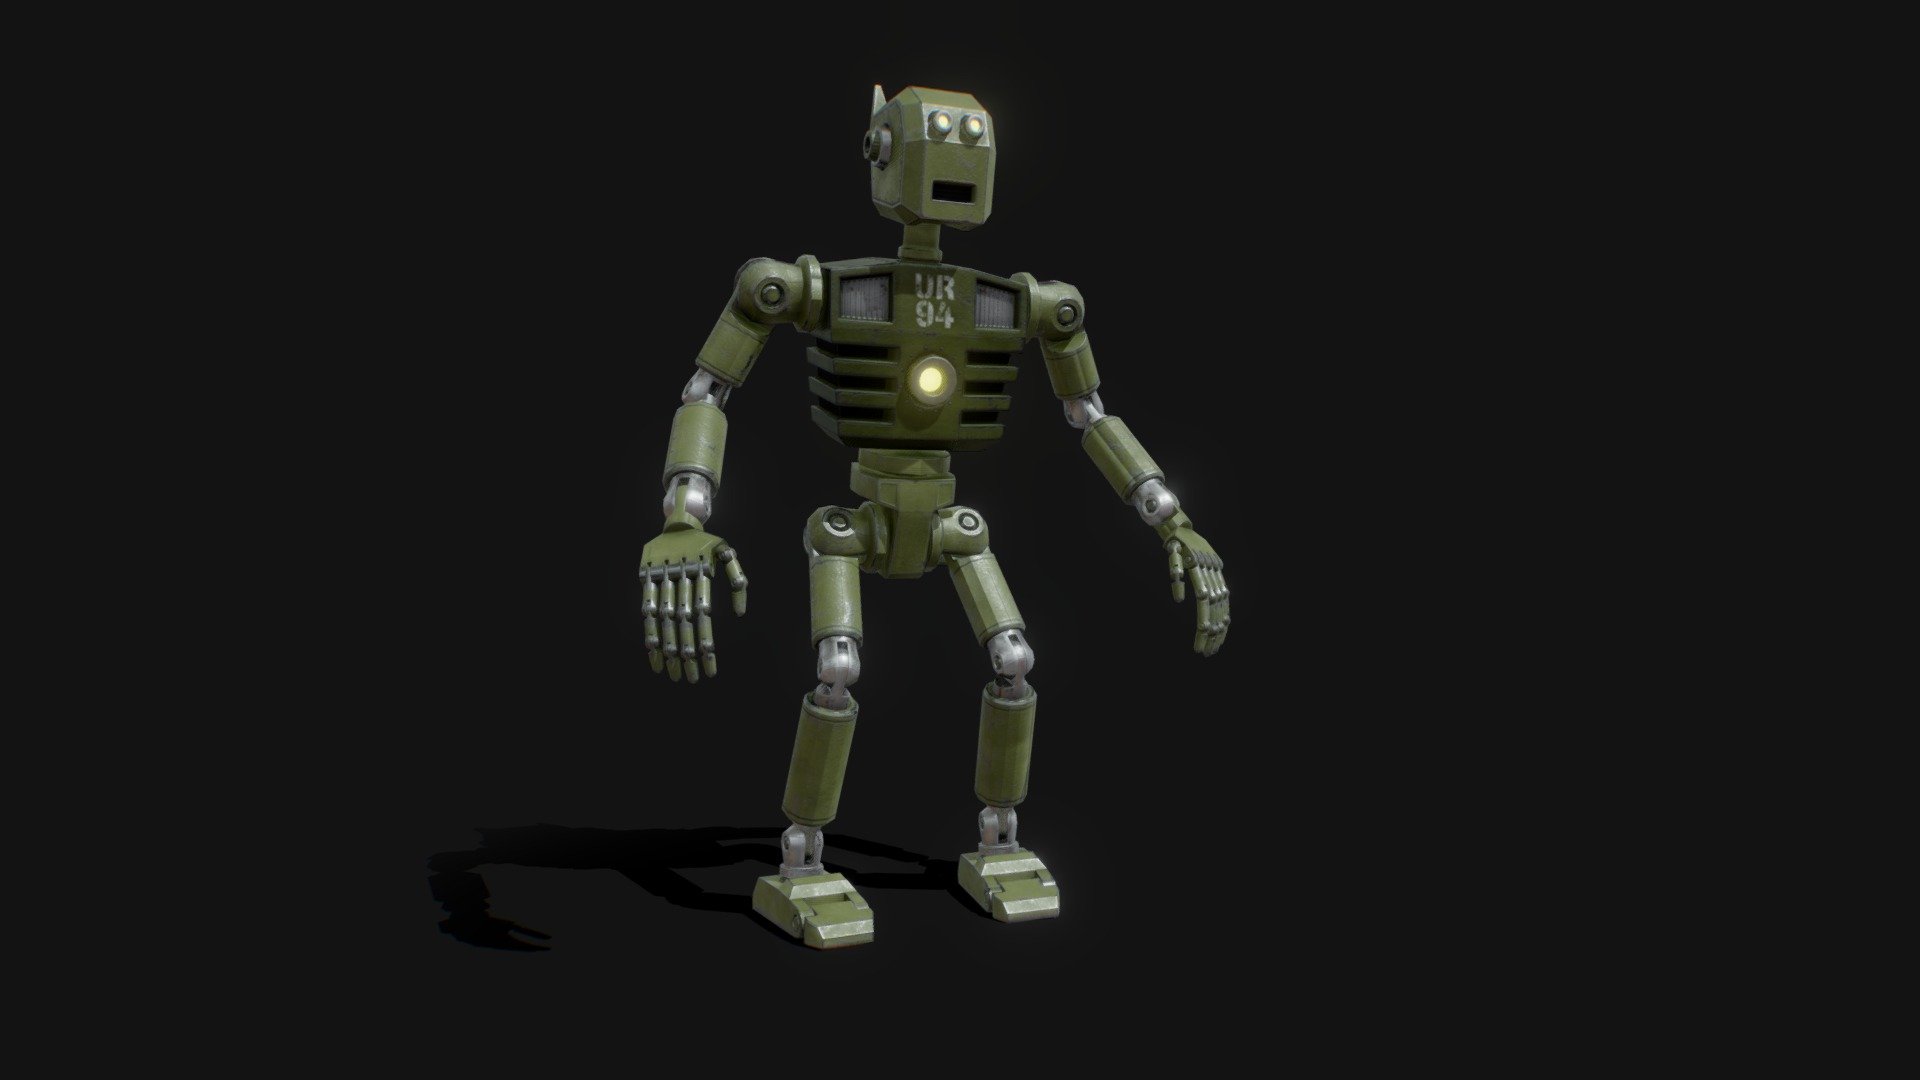 Ski-Fi Worn out Robot  in retro style. Humanoid Iron steampunk military Robot. 3D model created rigged and animated in Blender 3D 3d model